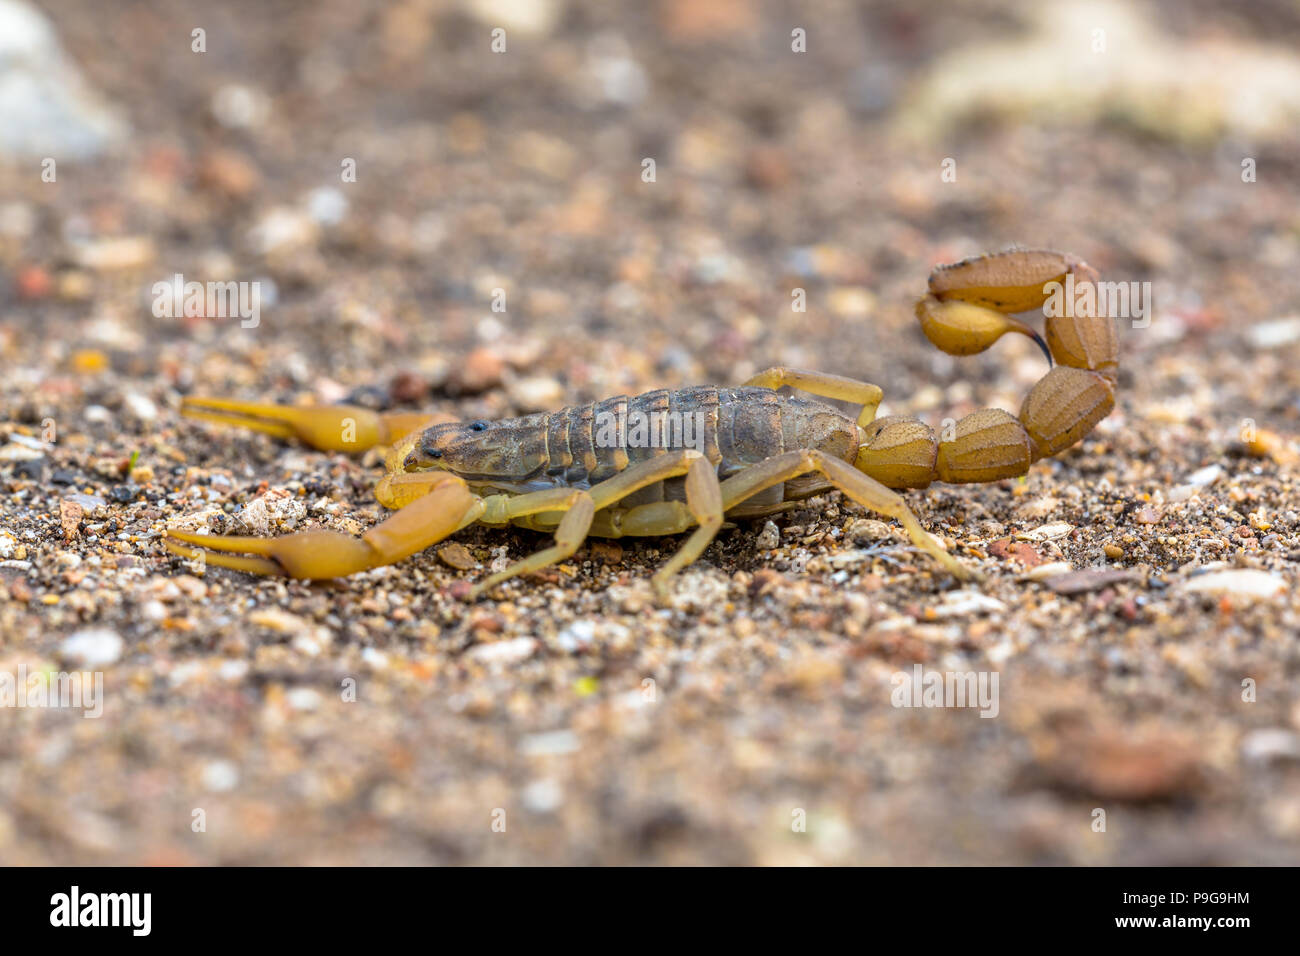 Common Yellow Scorpion (Buthus occitanus) in defensive mode against dangers. Seen from side Stock Photo